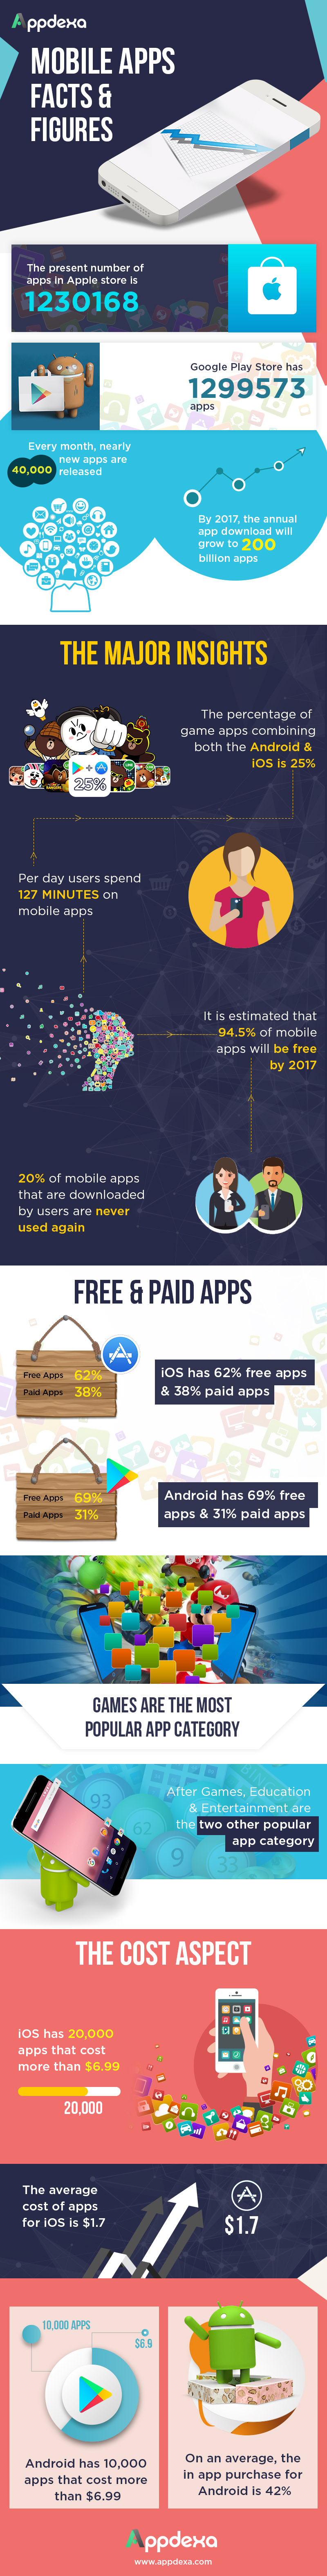 Mobile Apps Facts And Figures